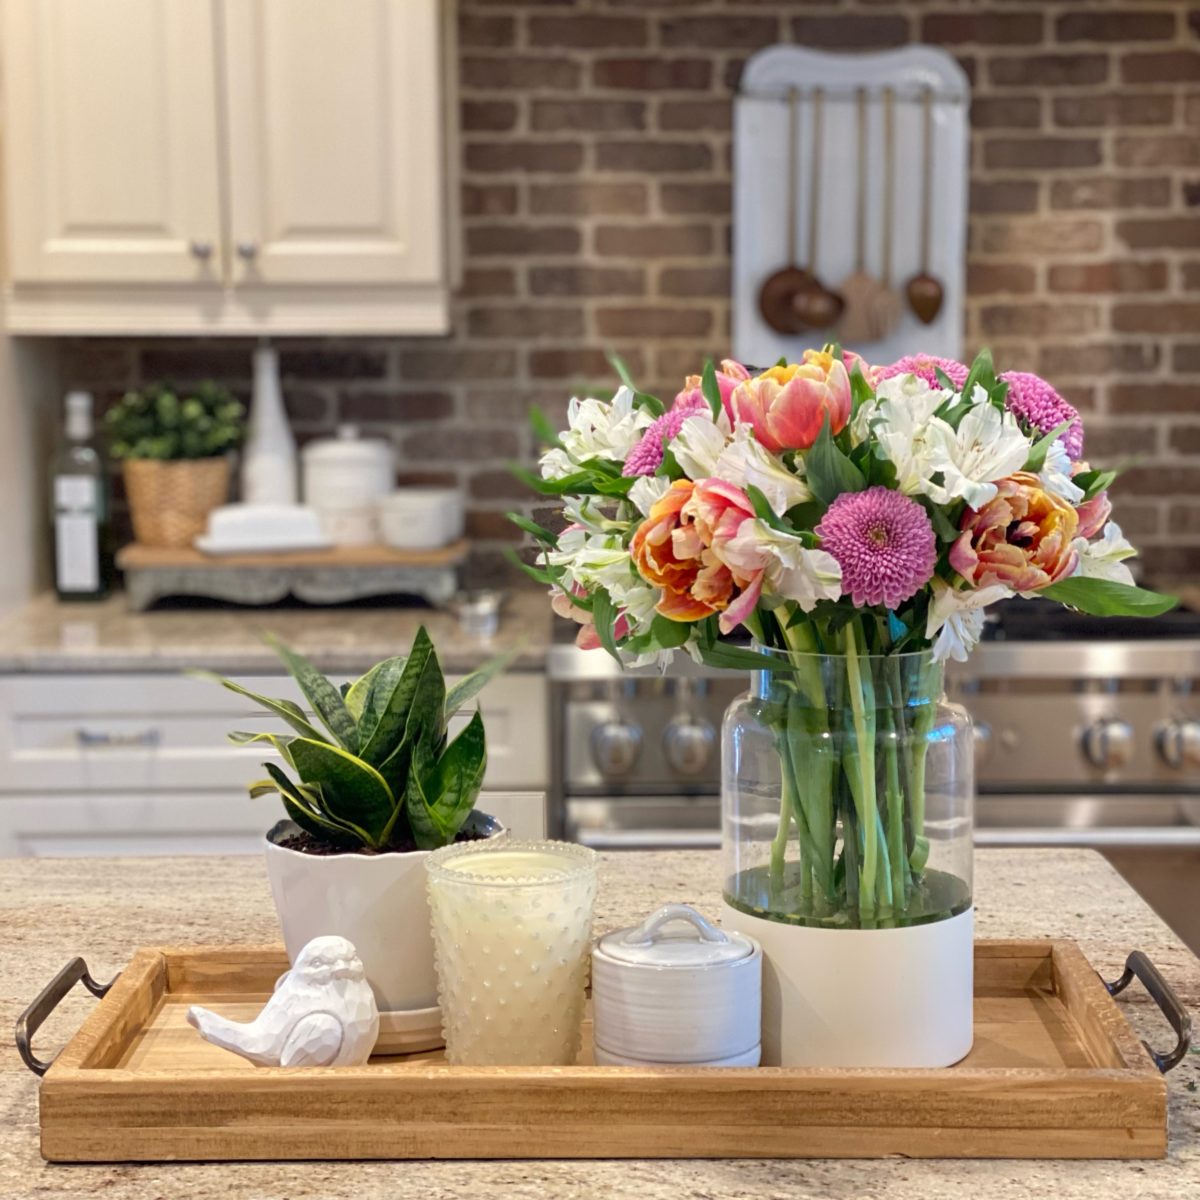 DIY wood farmhouse tray on the kitchen island with a floral arrangement, plant, and candle.